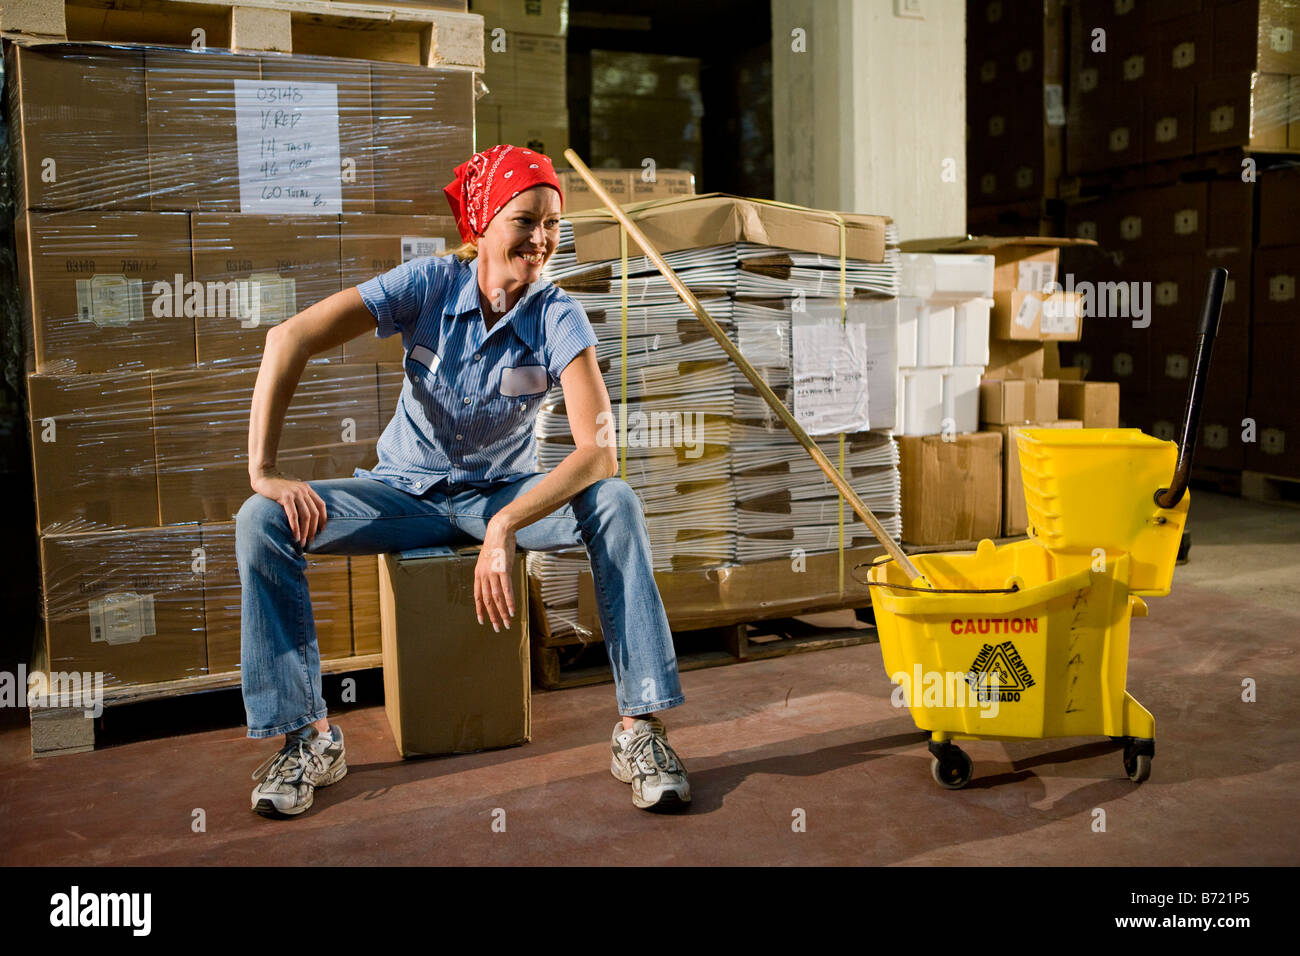 Janitor with mop bucket in storage warehouse Stock Photo - Alamy